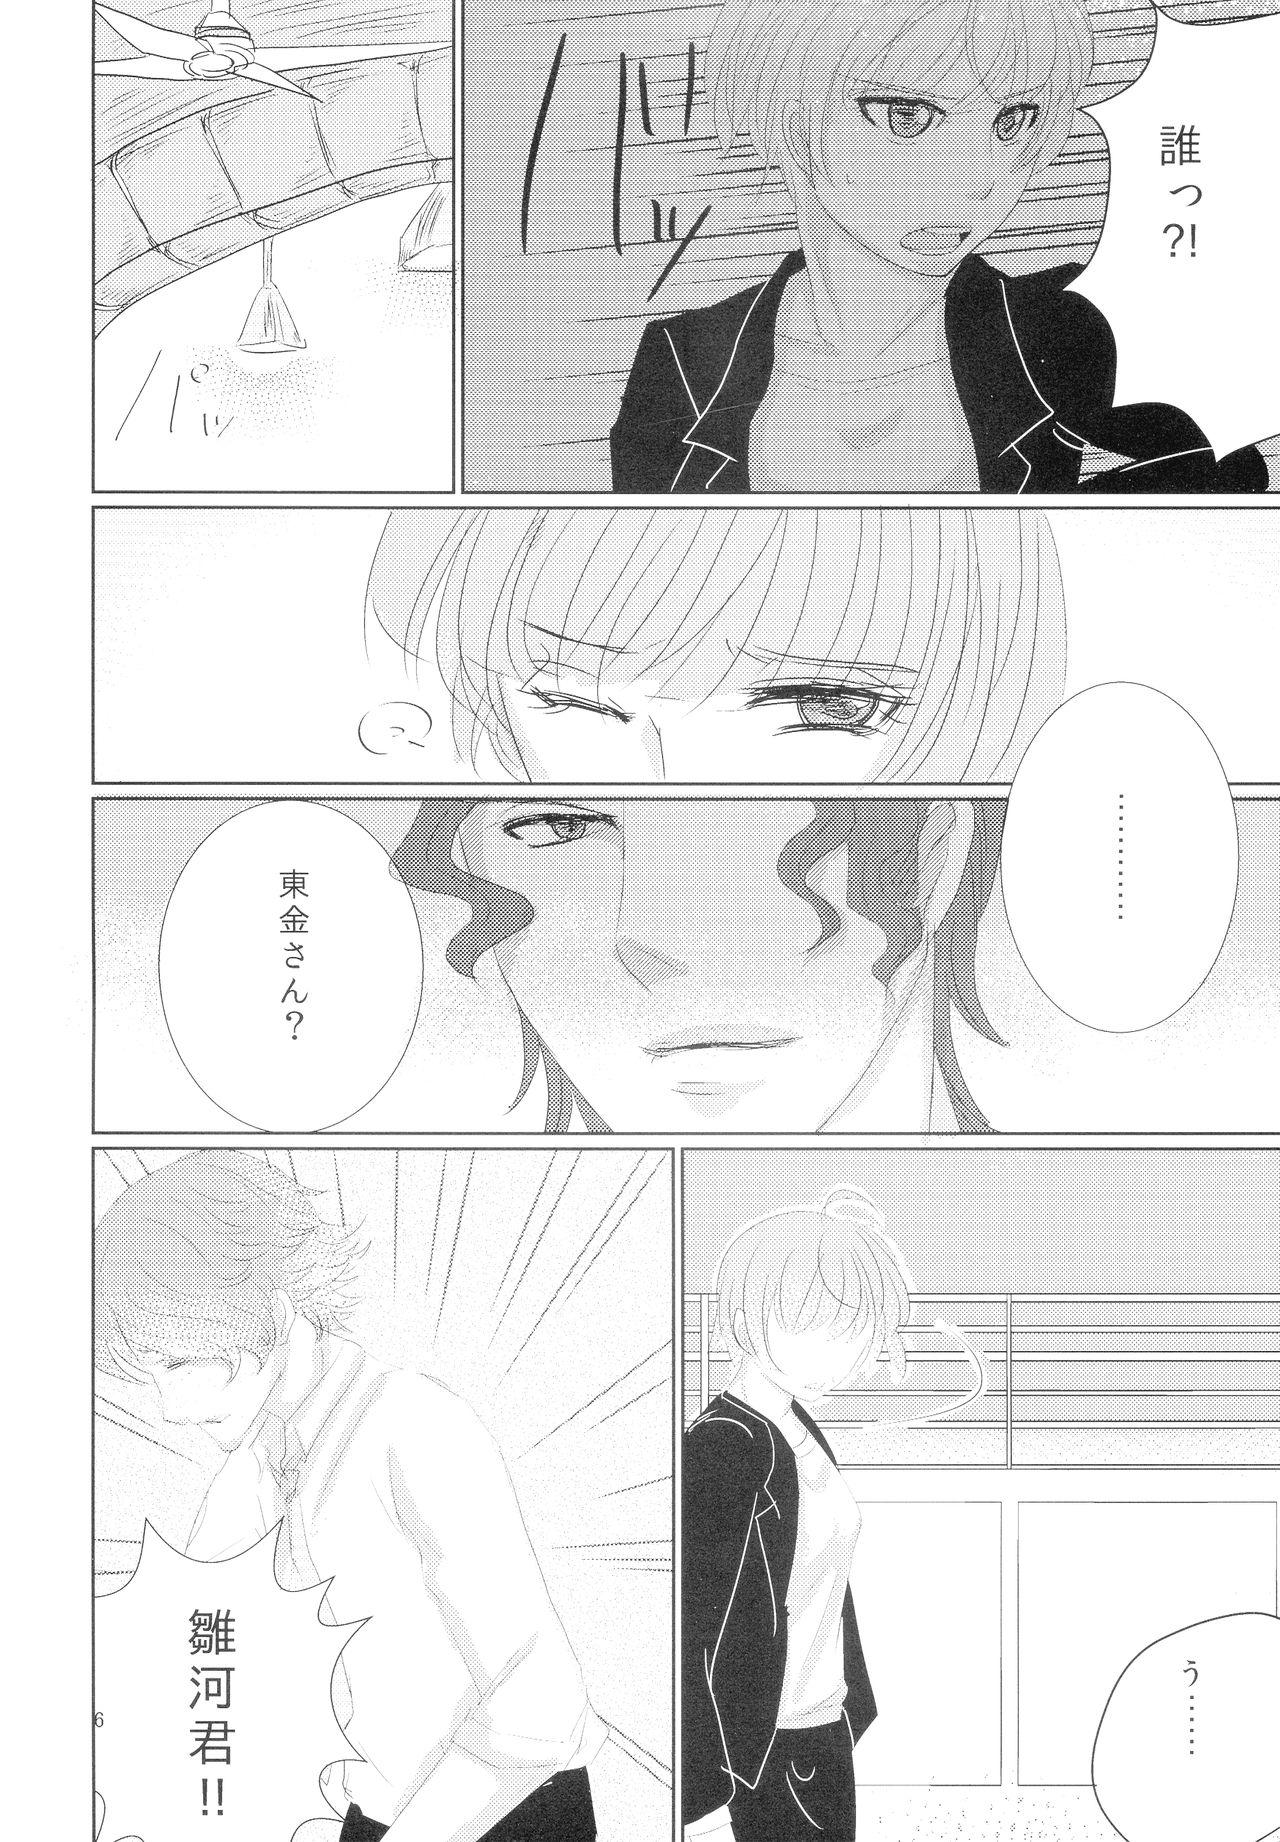 Squirters CSD - Psycho-pass Femboy - Page 6